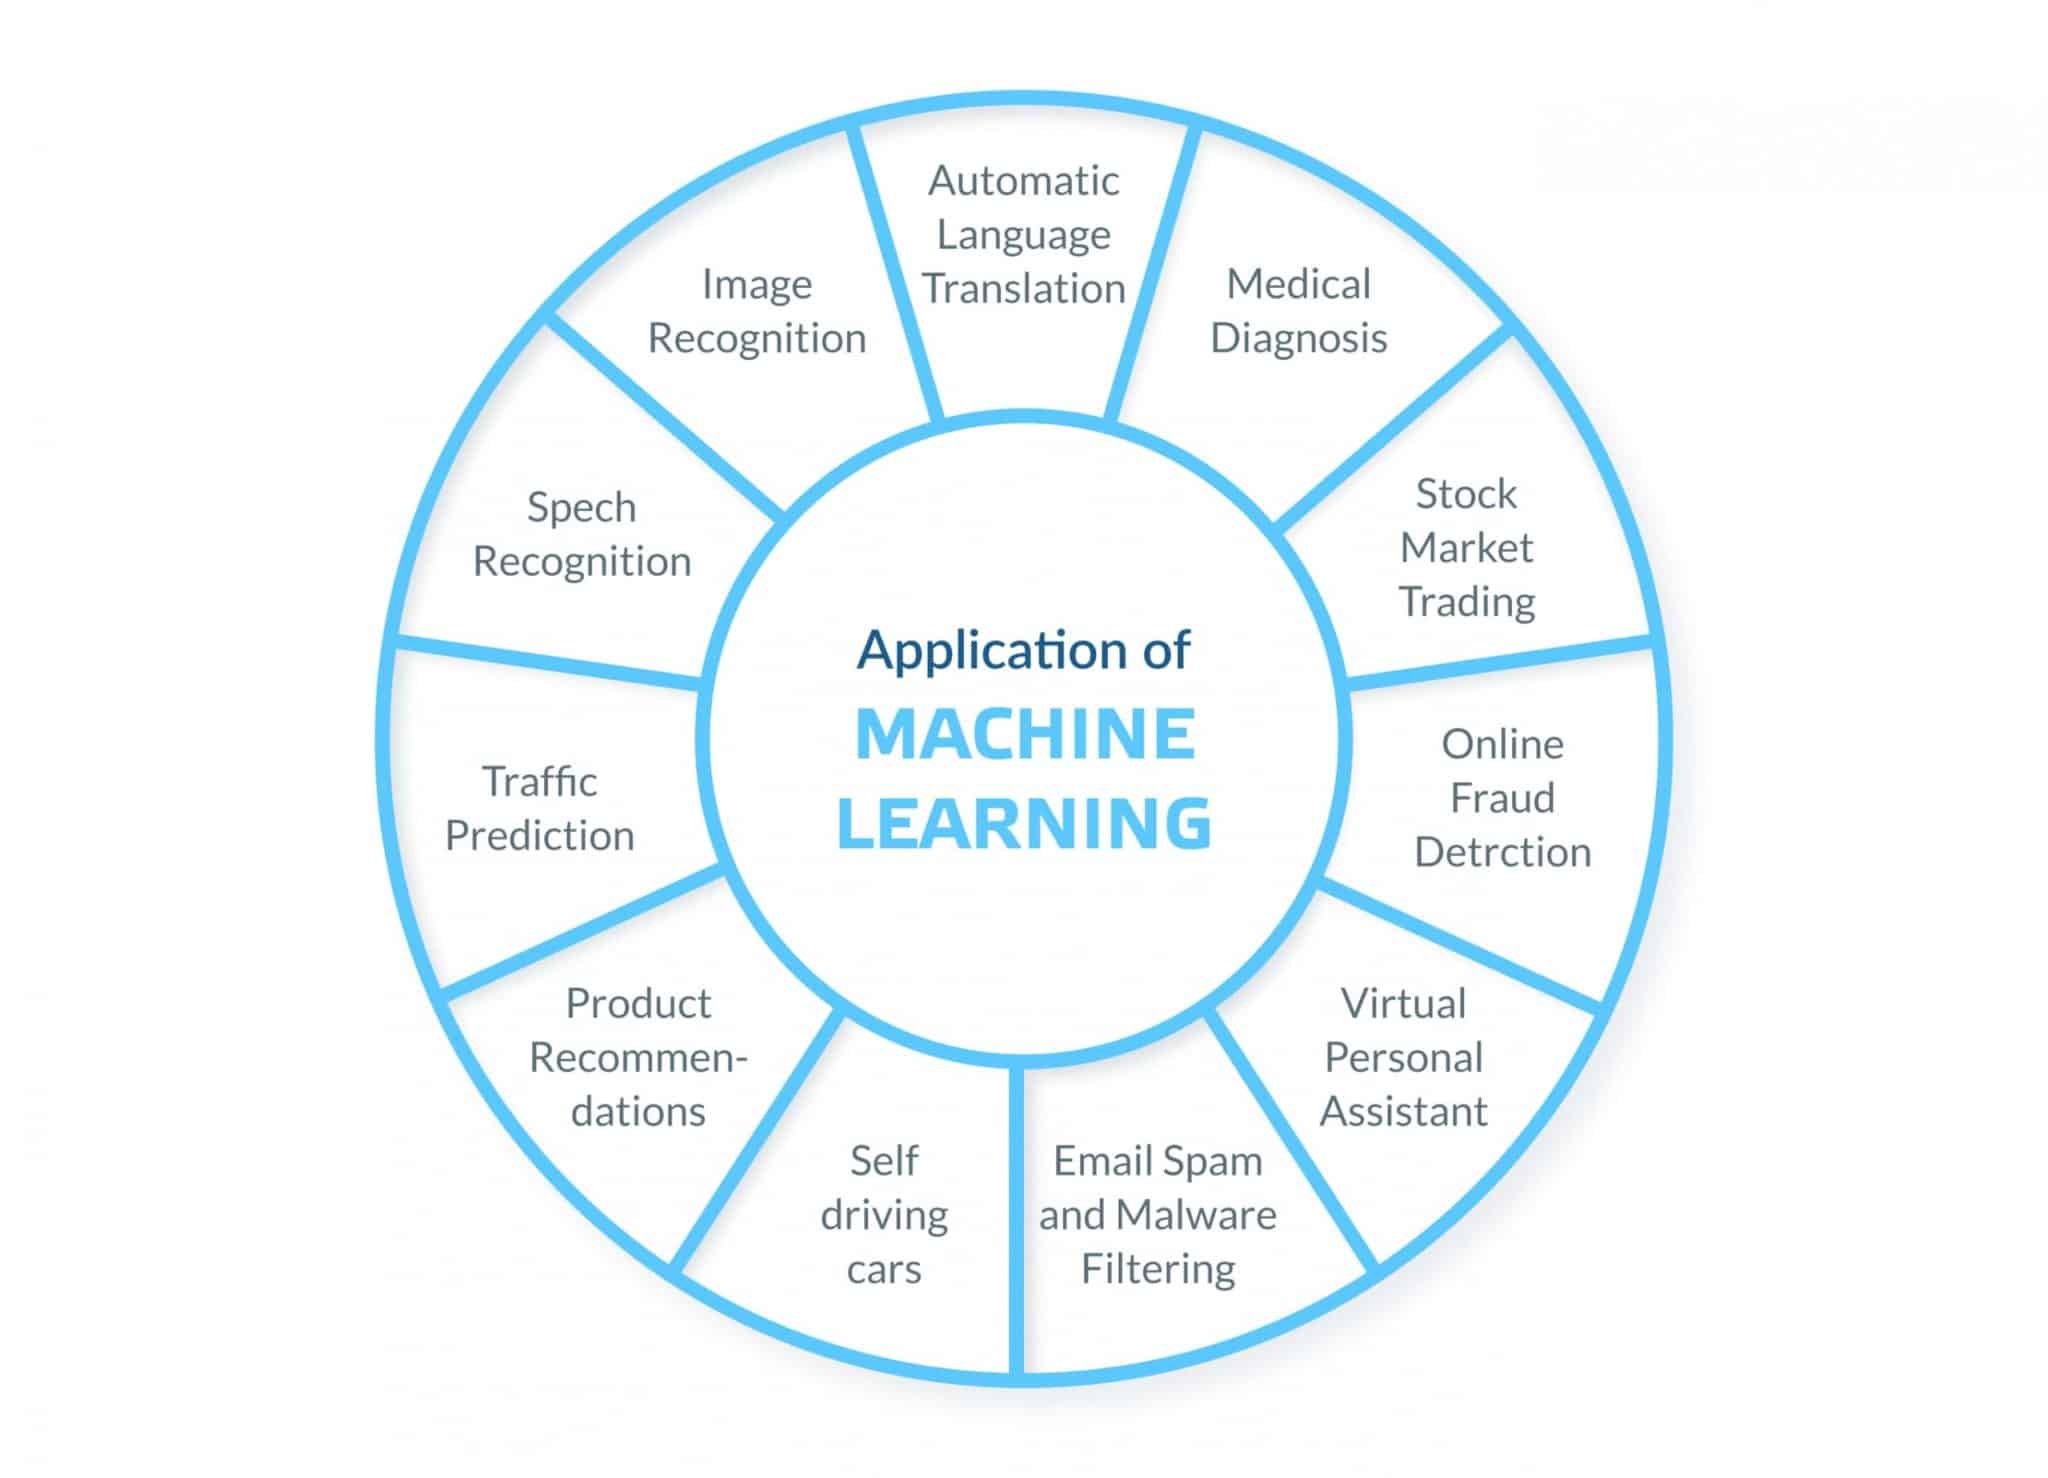 What can machine learning be used for?